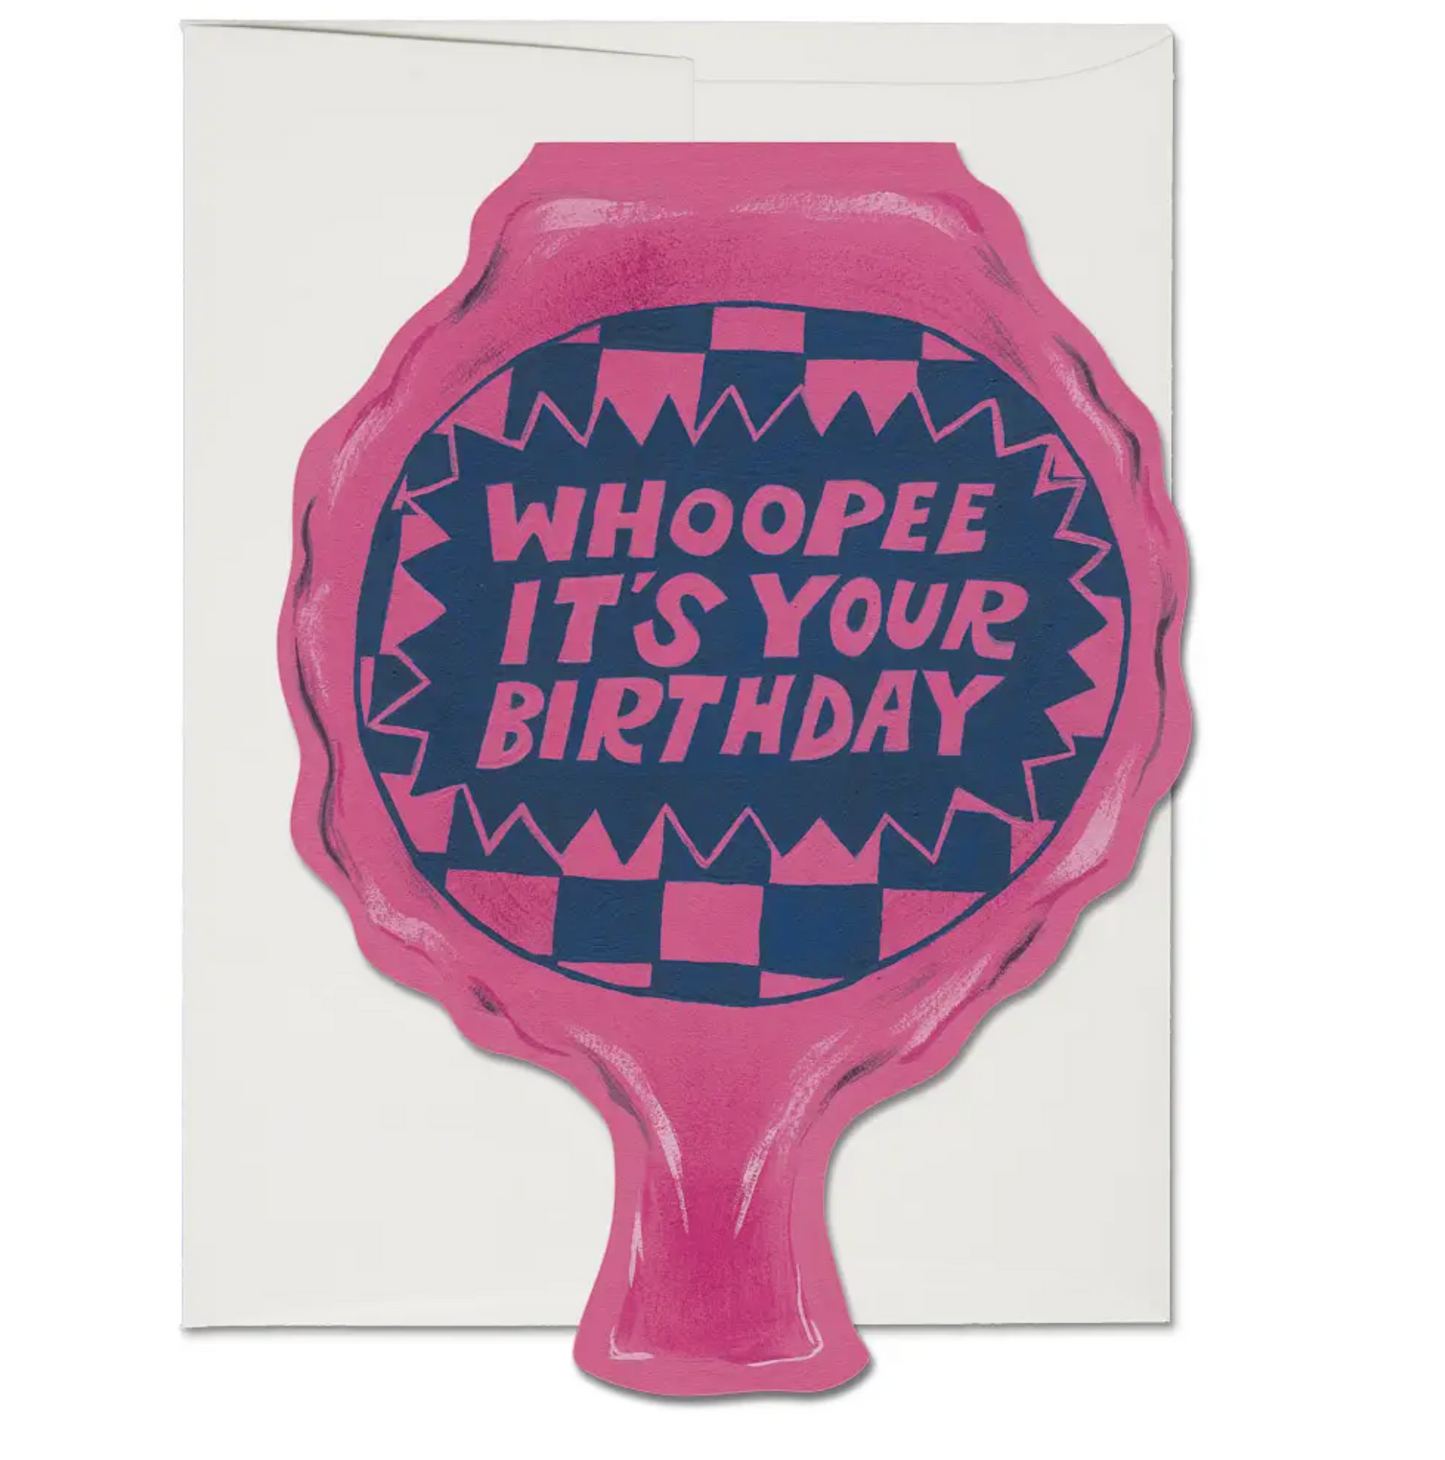 Whoopee It's Your Birthday Card